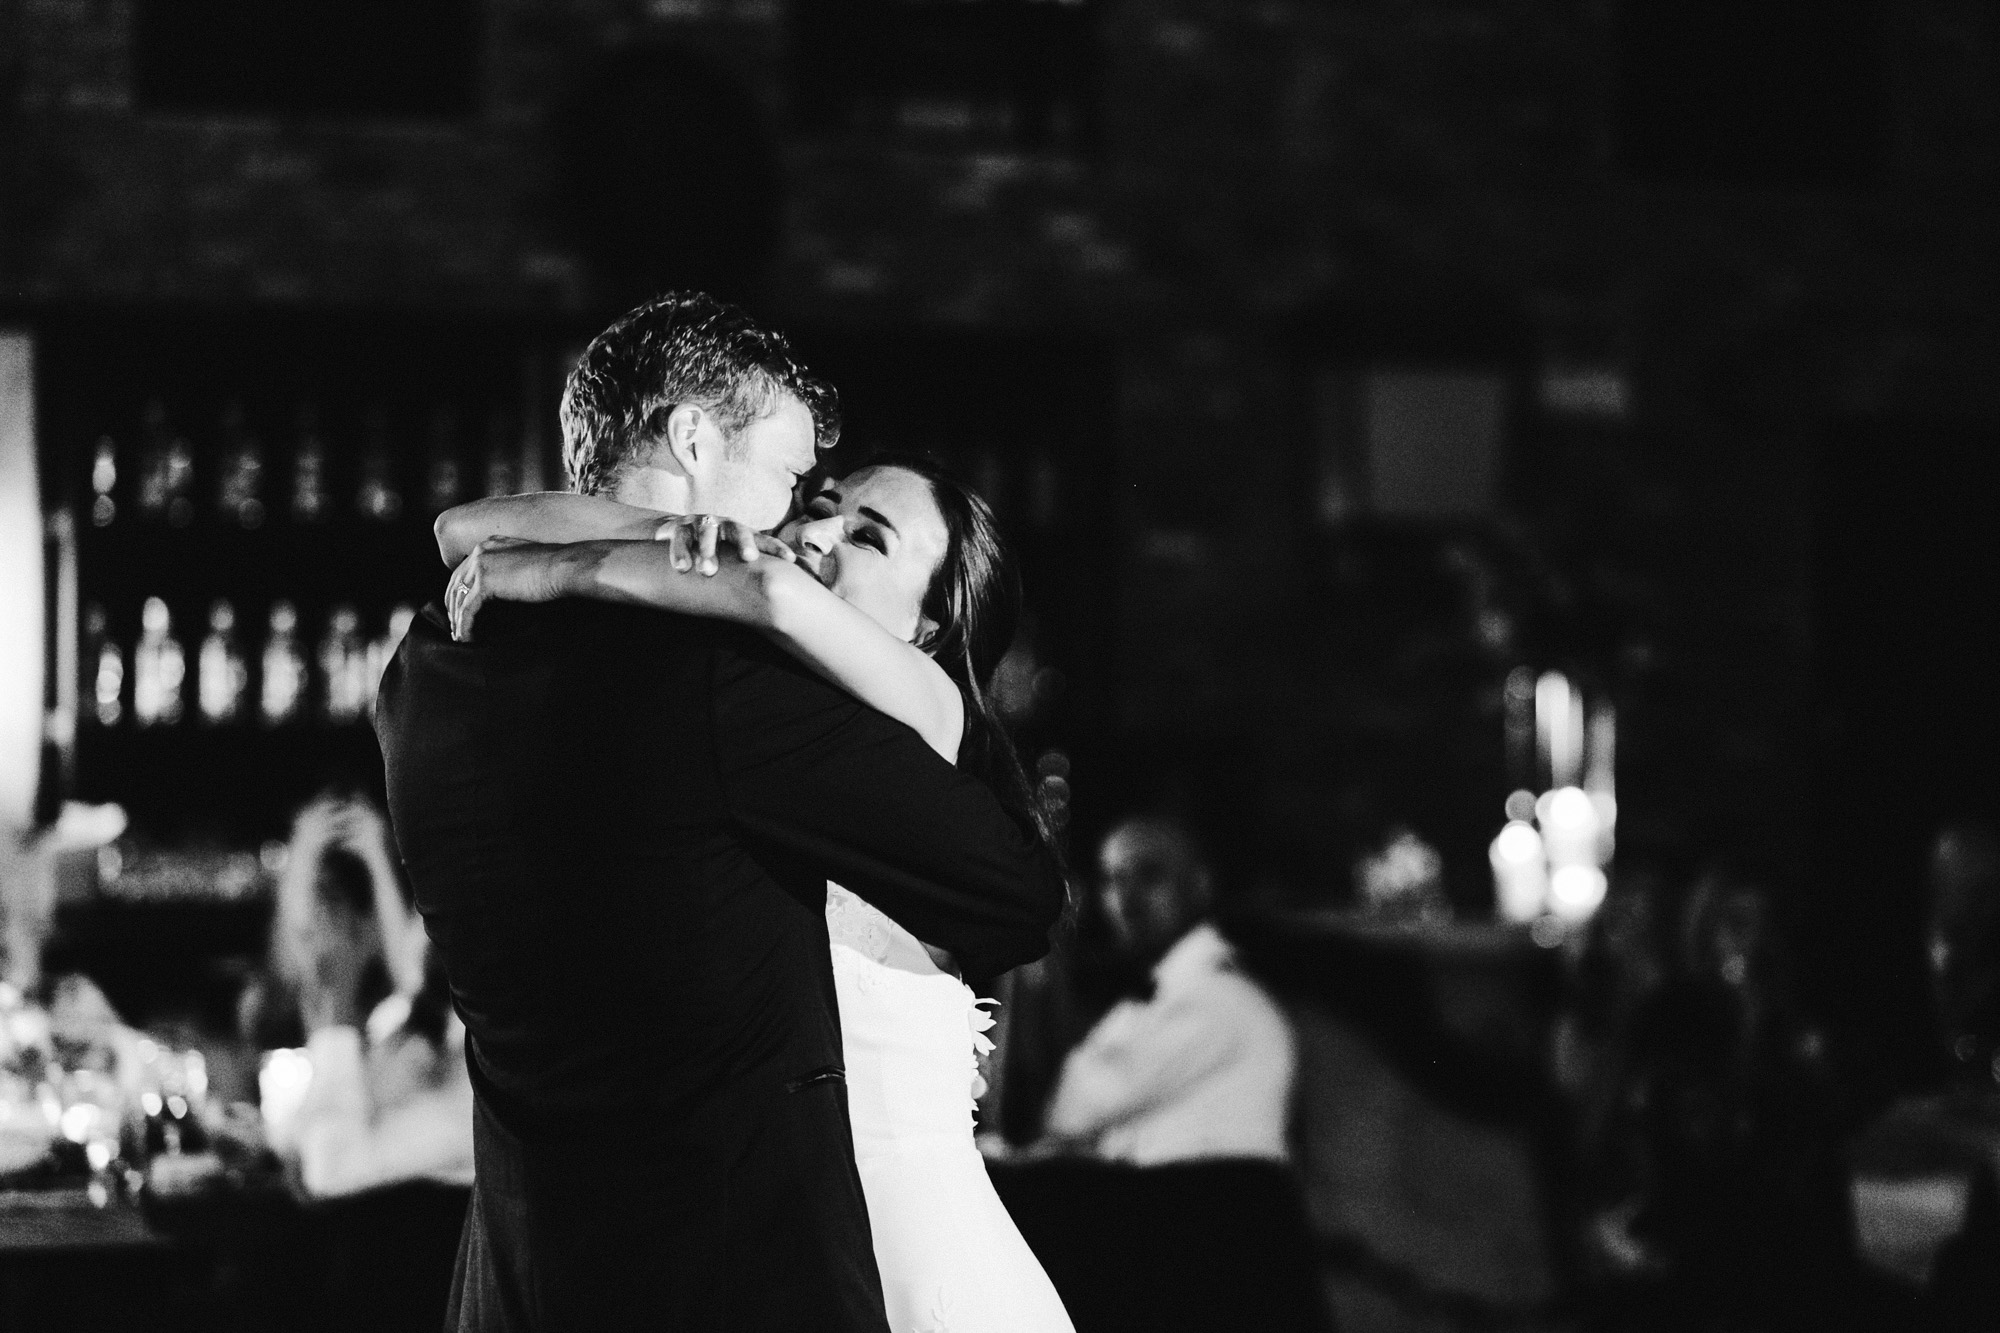 A bride and groom share their first dance at their City Hall wedding in the West Loop of Chicago.